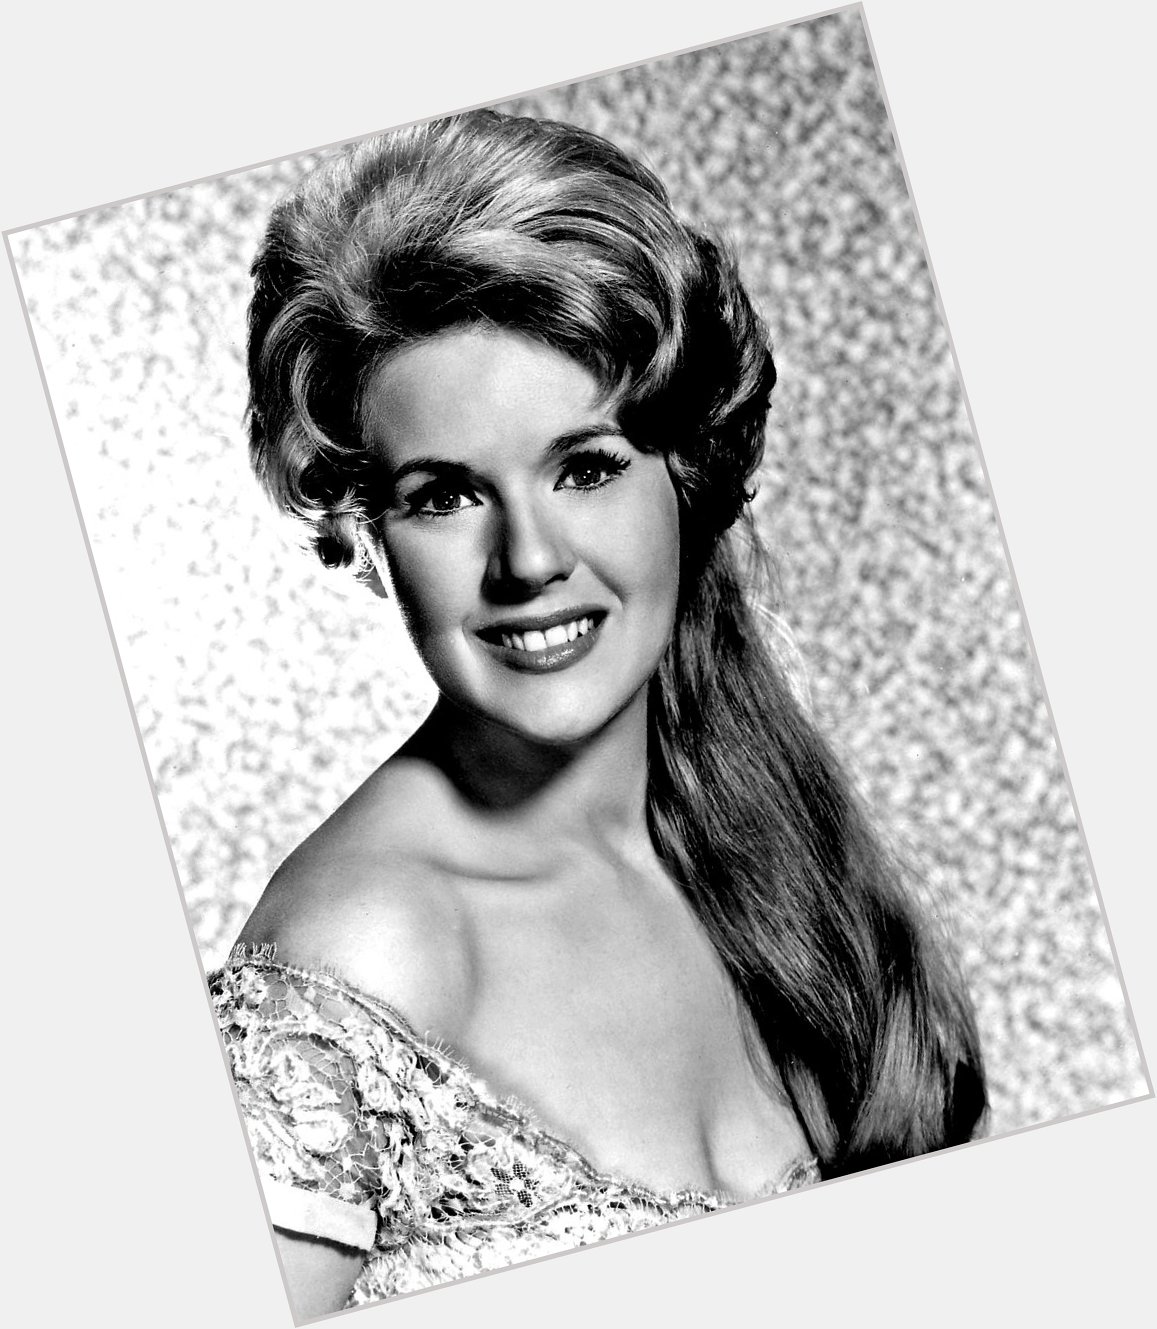 Happy Birthday to Connie Stevens! She turns 80 today. 